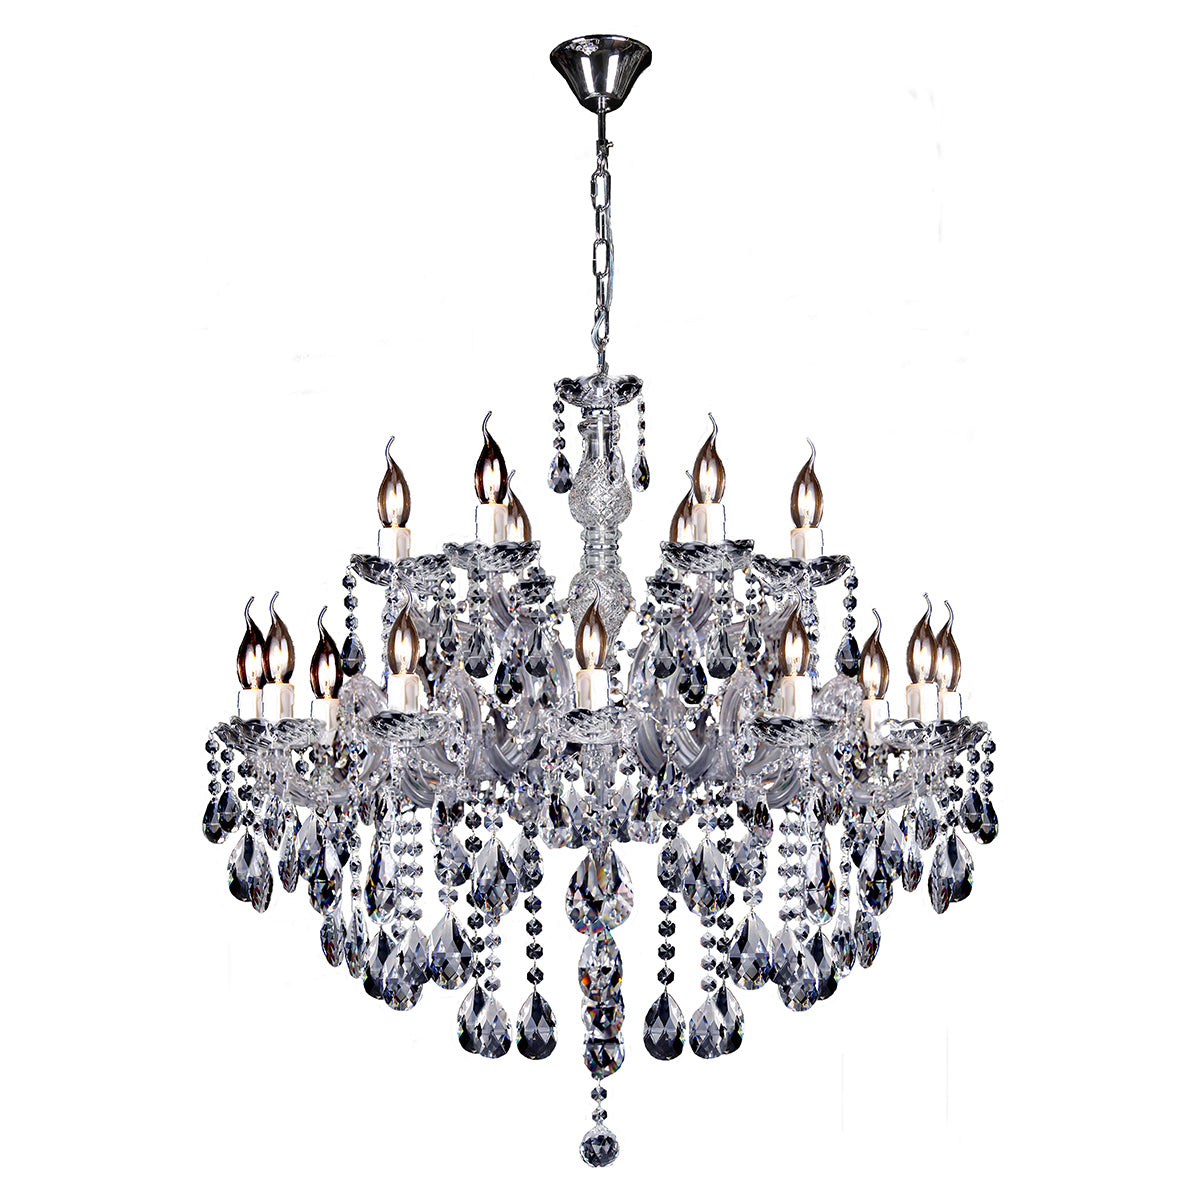 Zurich 18 Light Chrome Crystal Traditional Pendant Chandelier